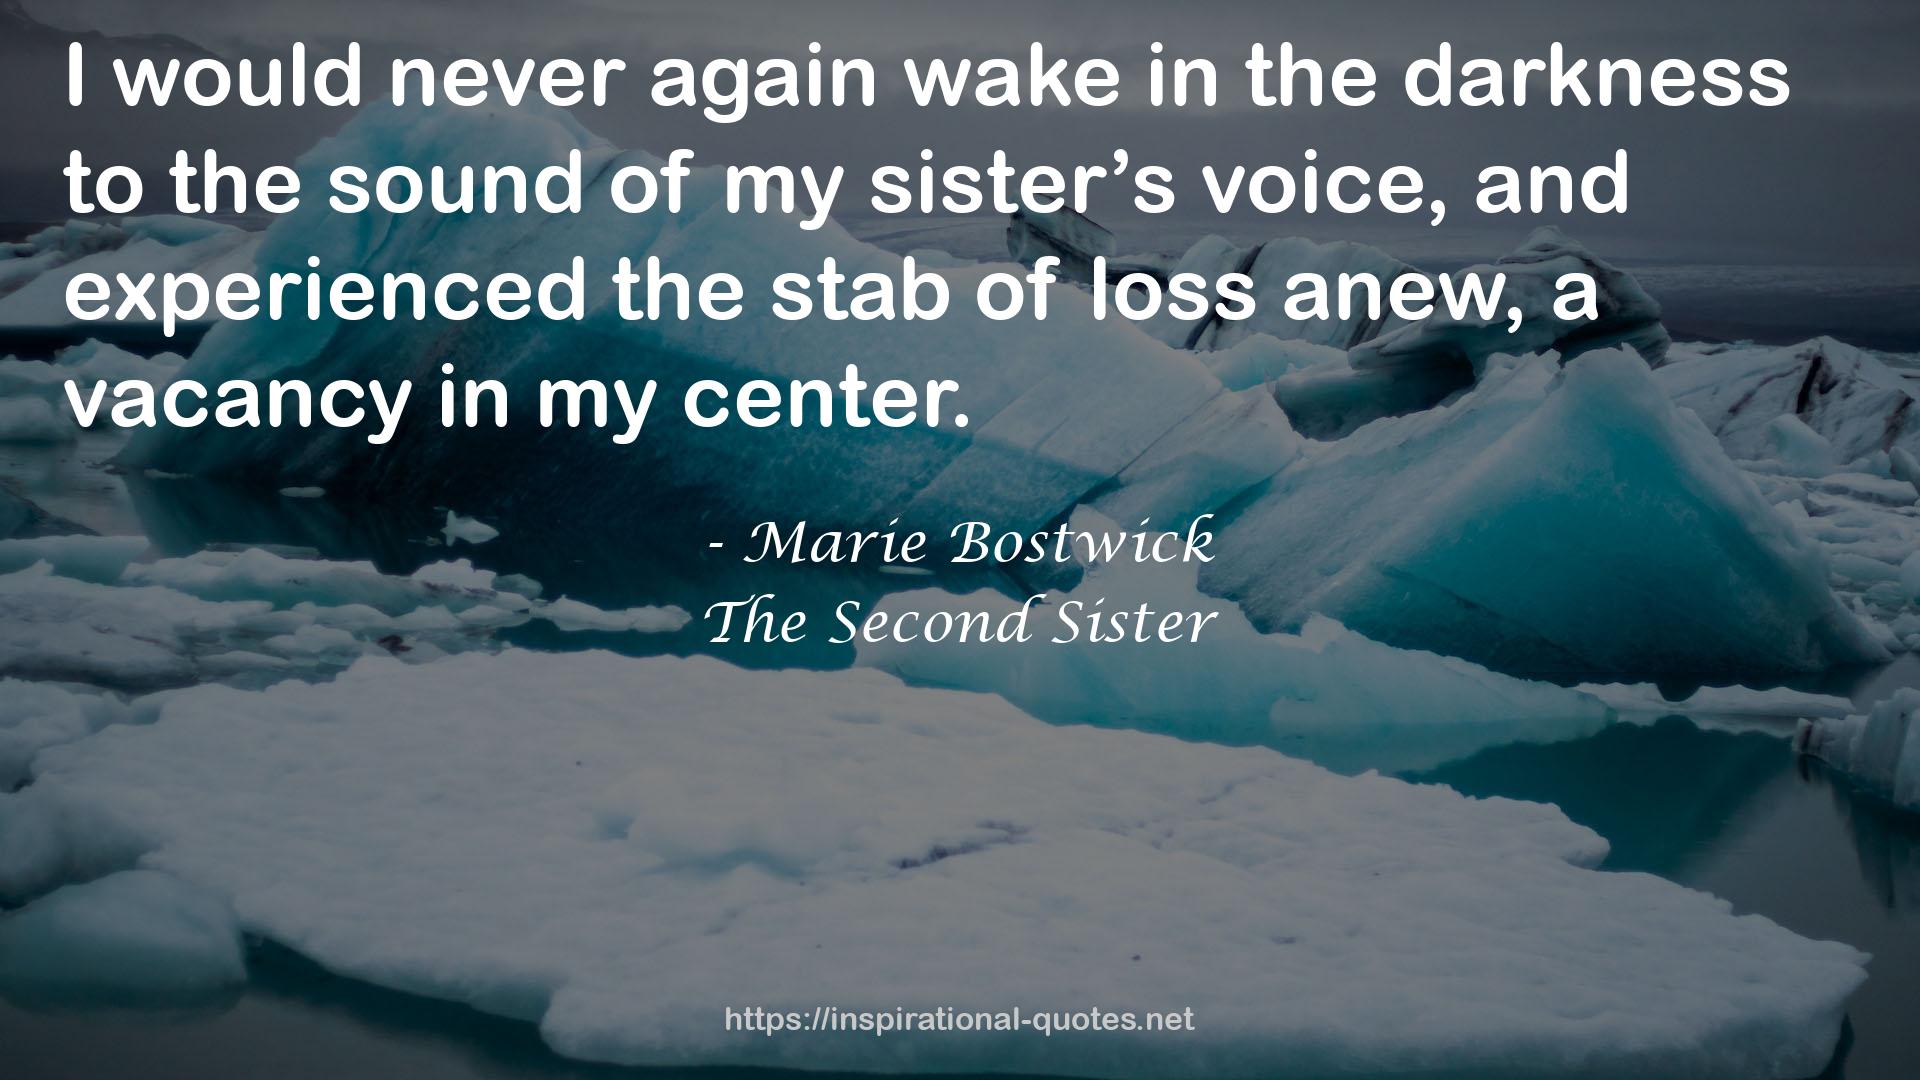 Marie Bostwick QUOTES